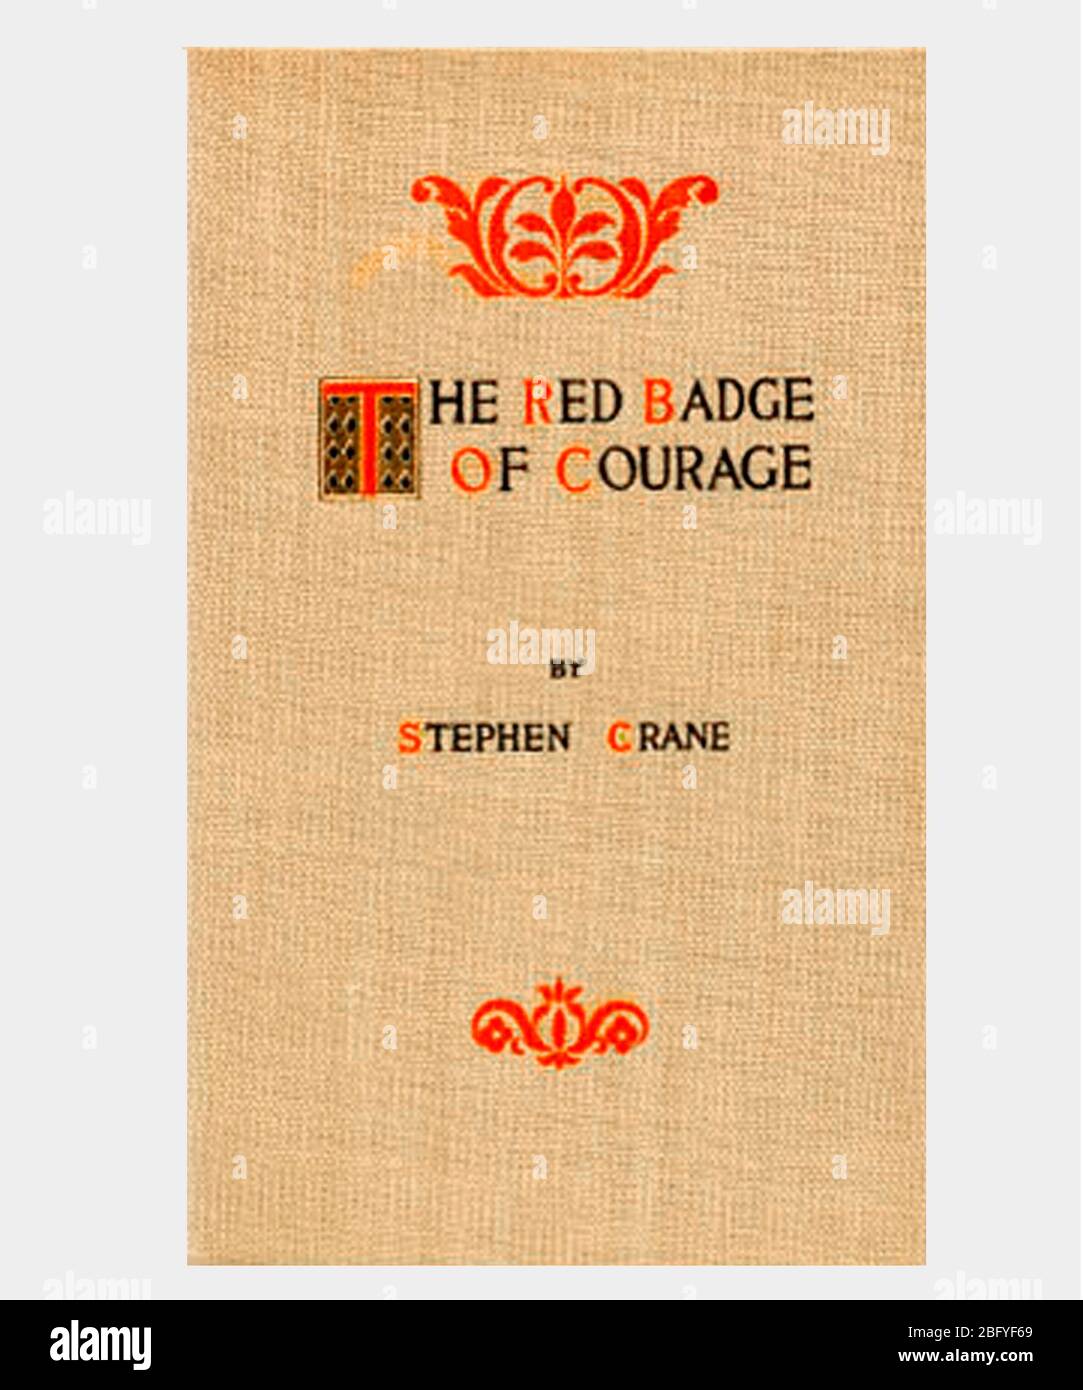 Stephen Crane The Red Badge of Courage Book Cover Refreshed and Reset Stock Photo